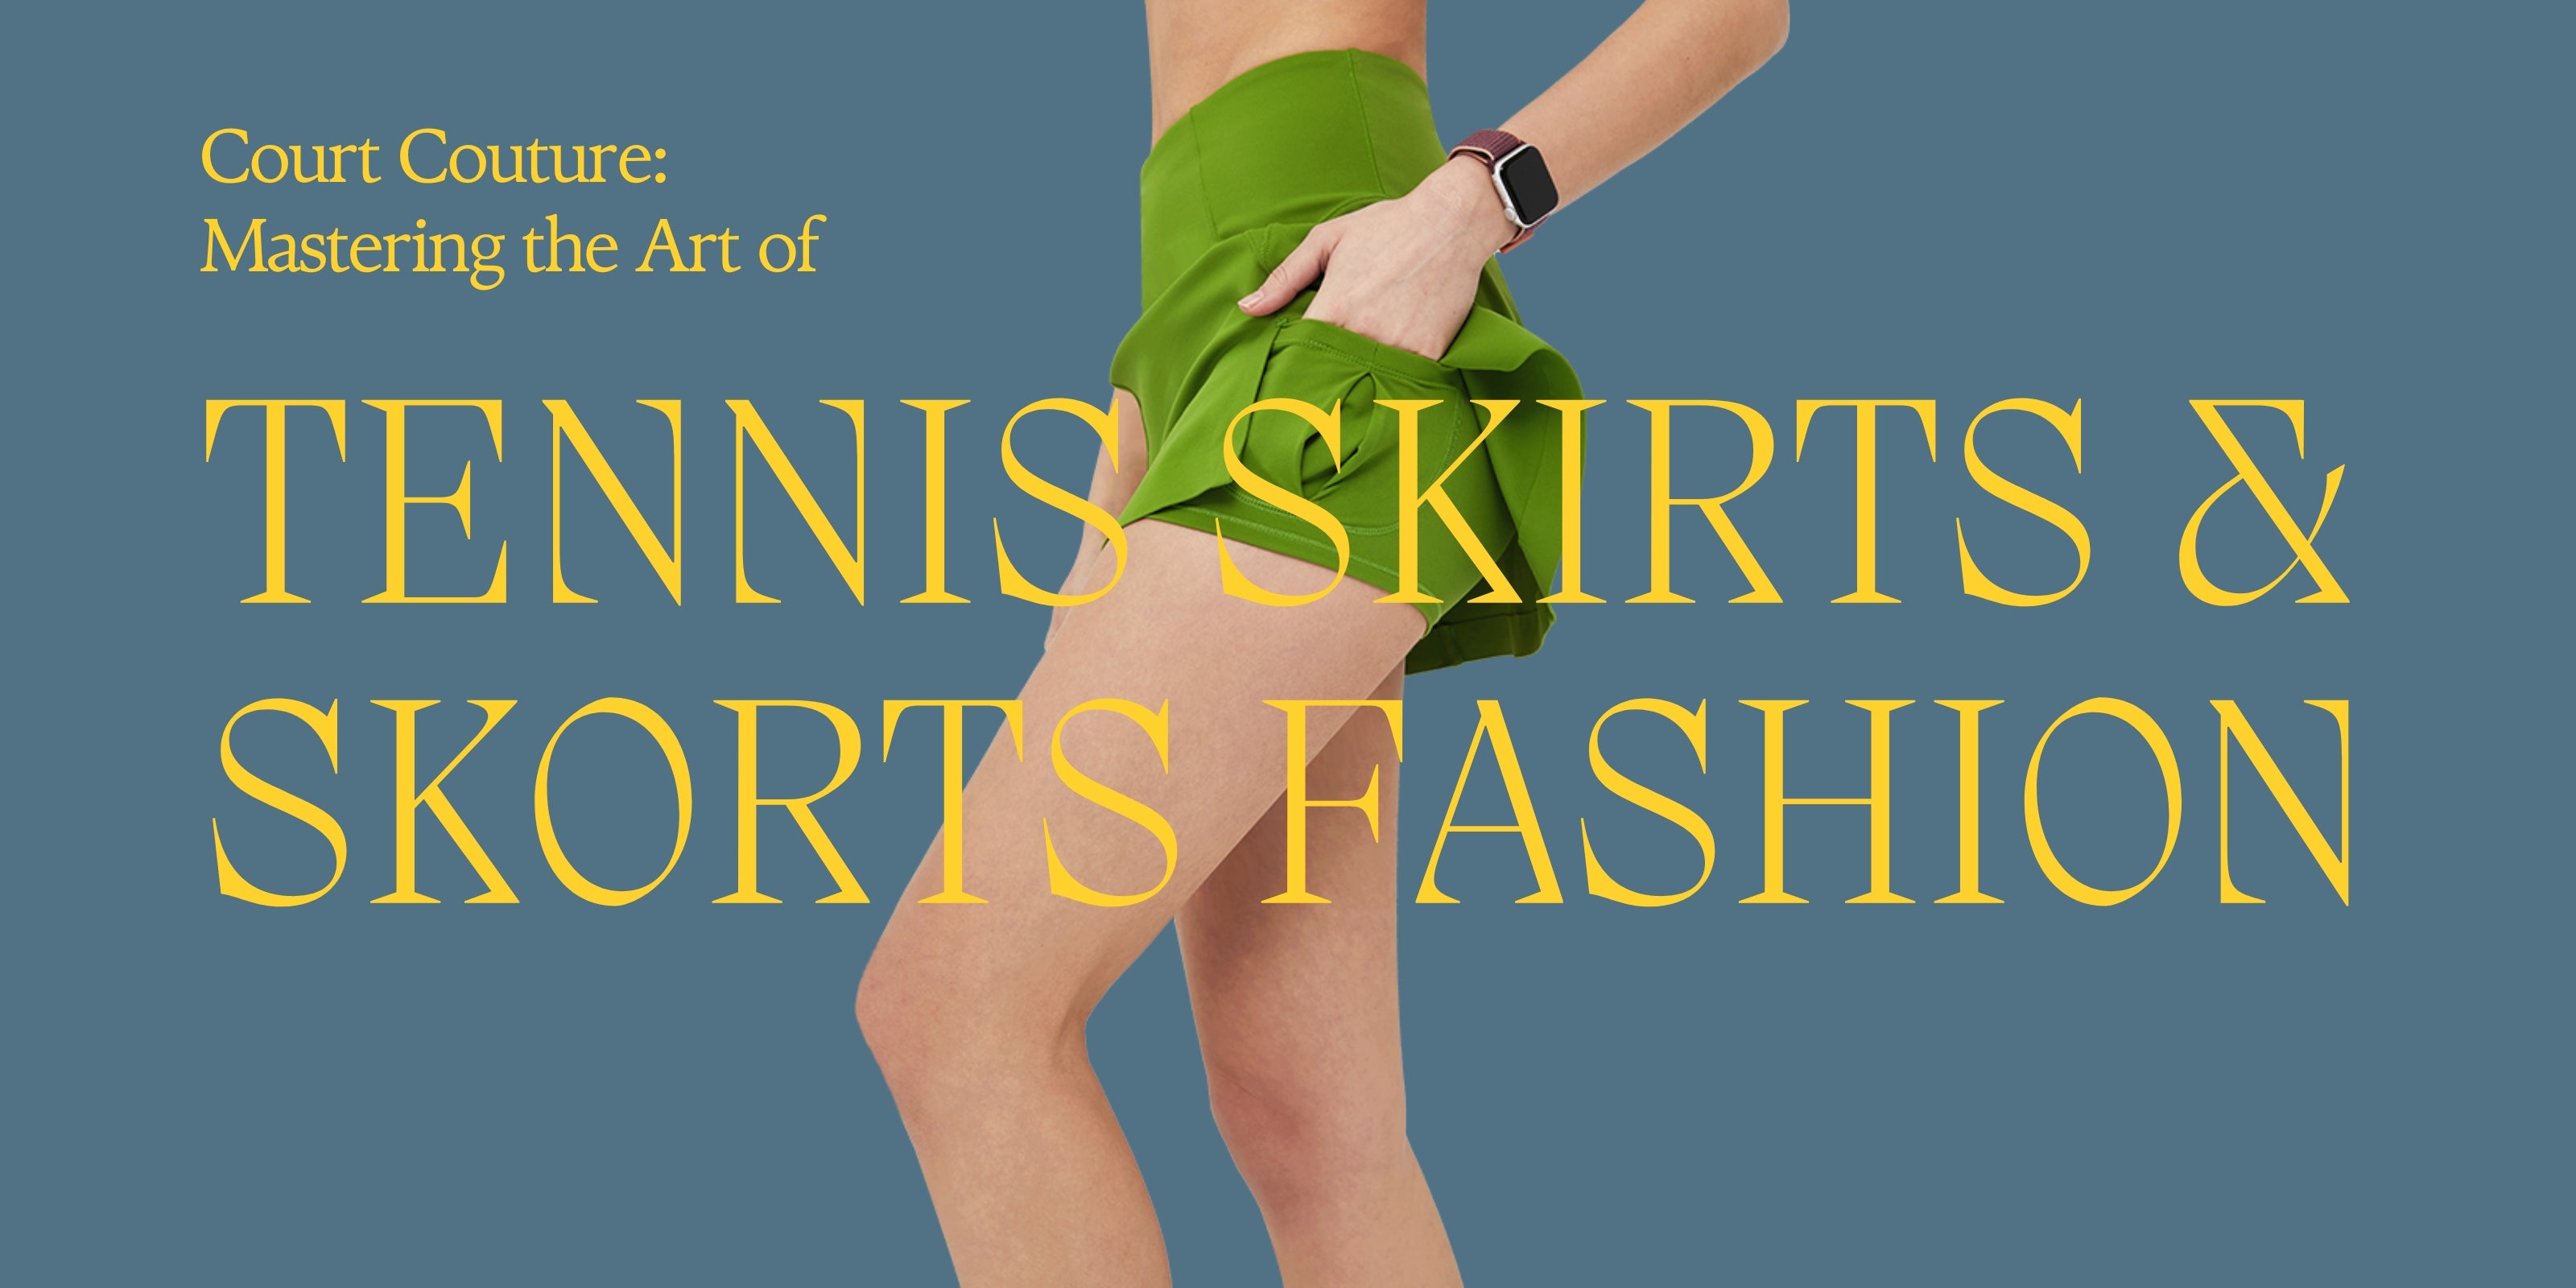 Court Couture: Mastering the Art of Tennis Skirts &amp; Skorts Fashion